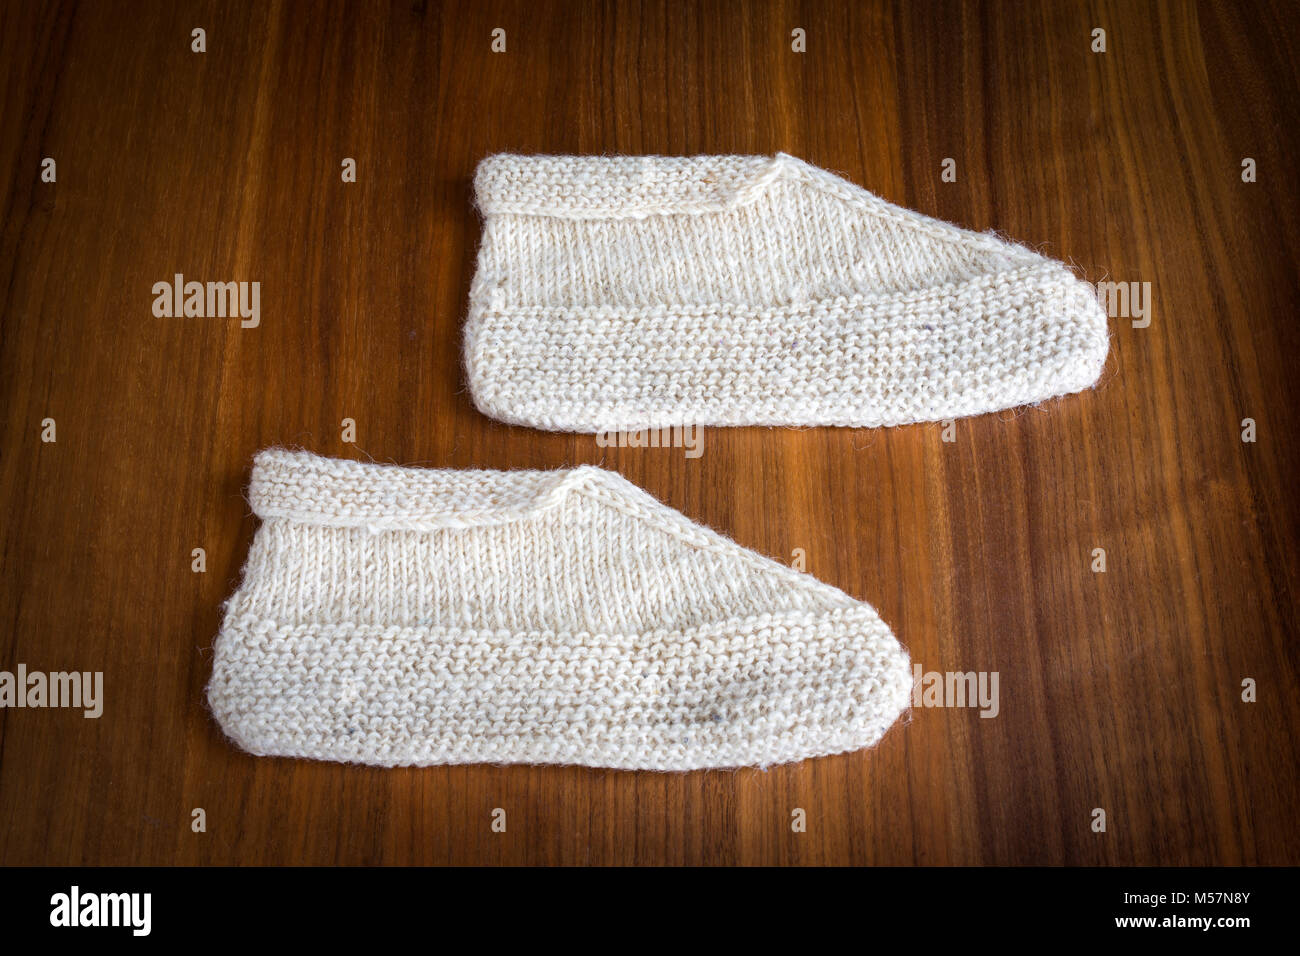 A typical production of the Balkans's handicrafts: woollen slippers knitted by hand. Artisanat des Balkans: chaussons en laine tricotés main. Stock Photo